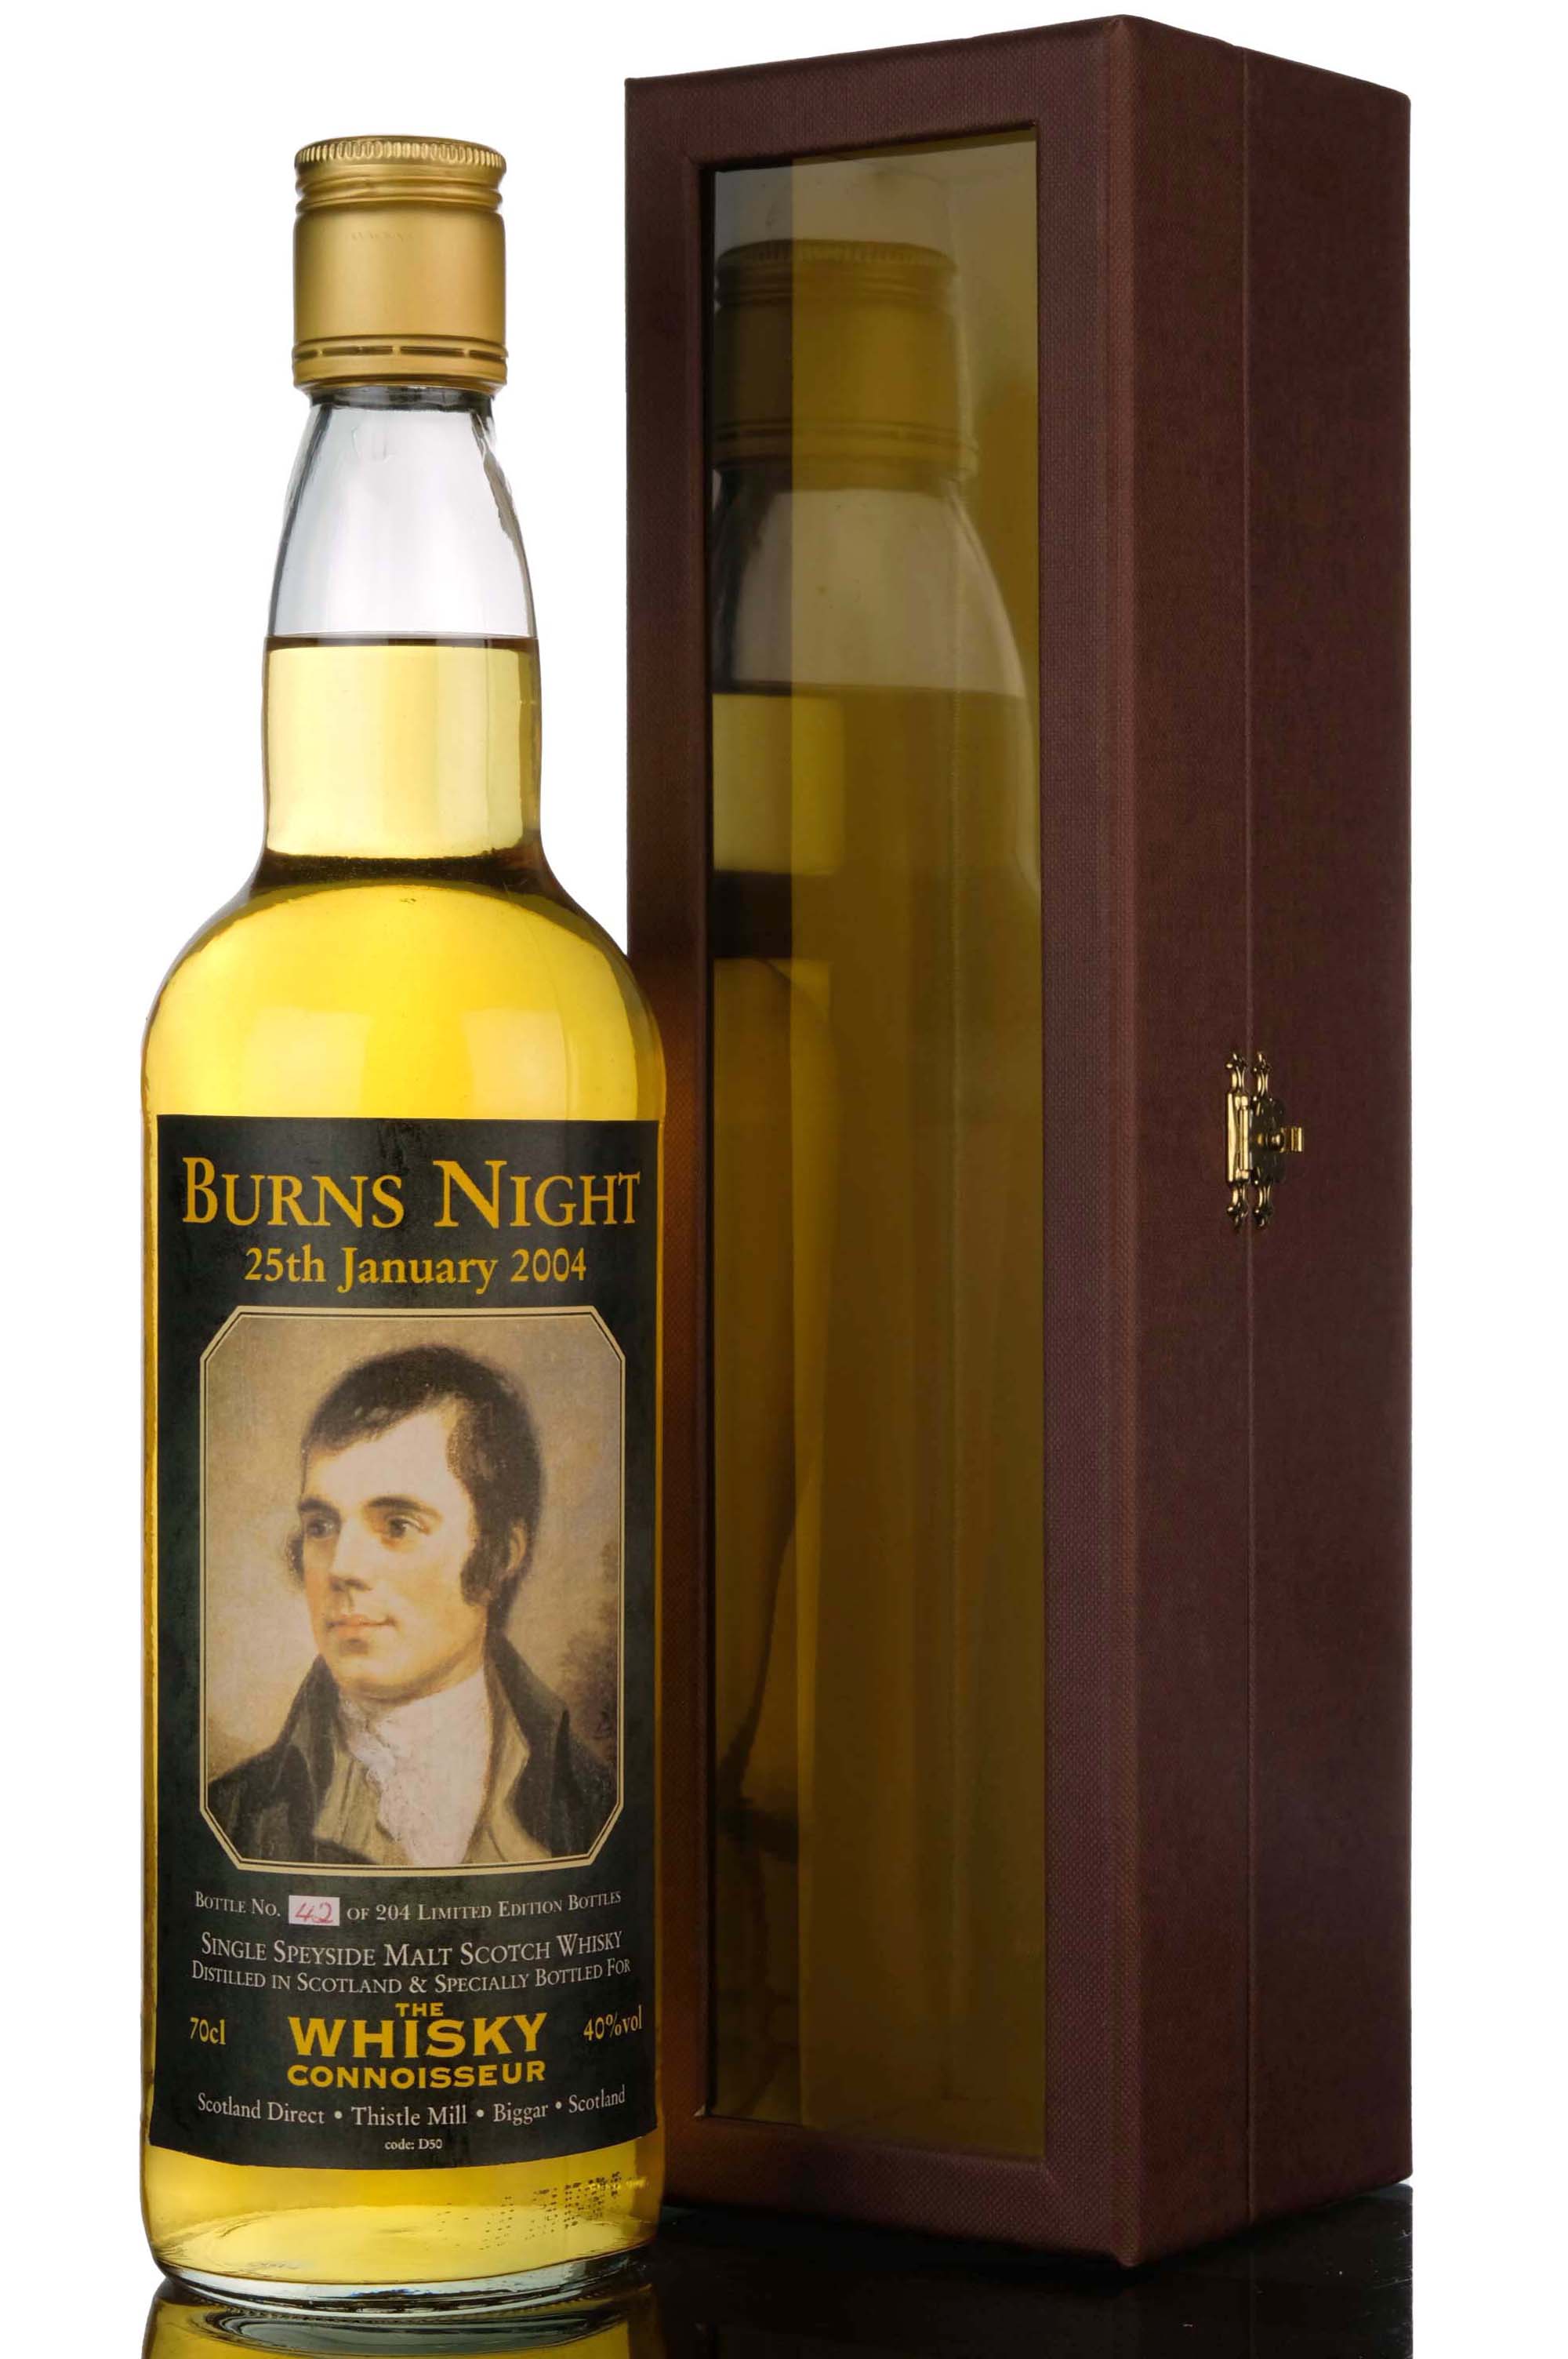 Burns Night 2004 - The Whisky Connoisseur